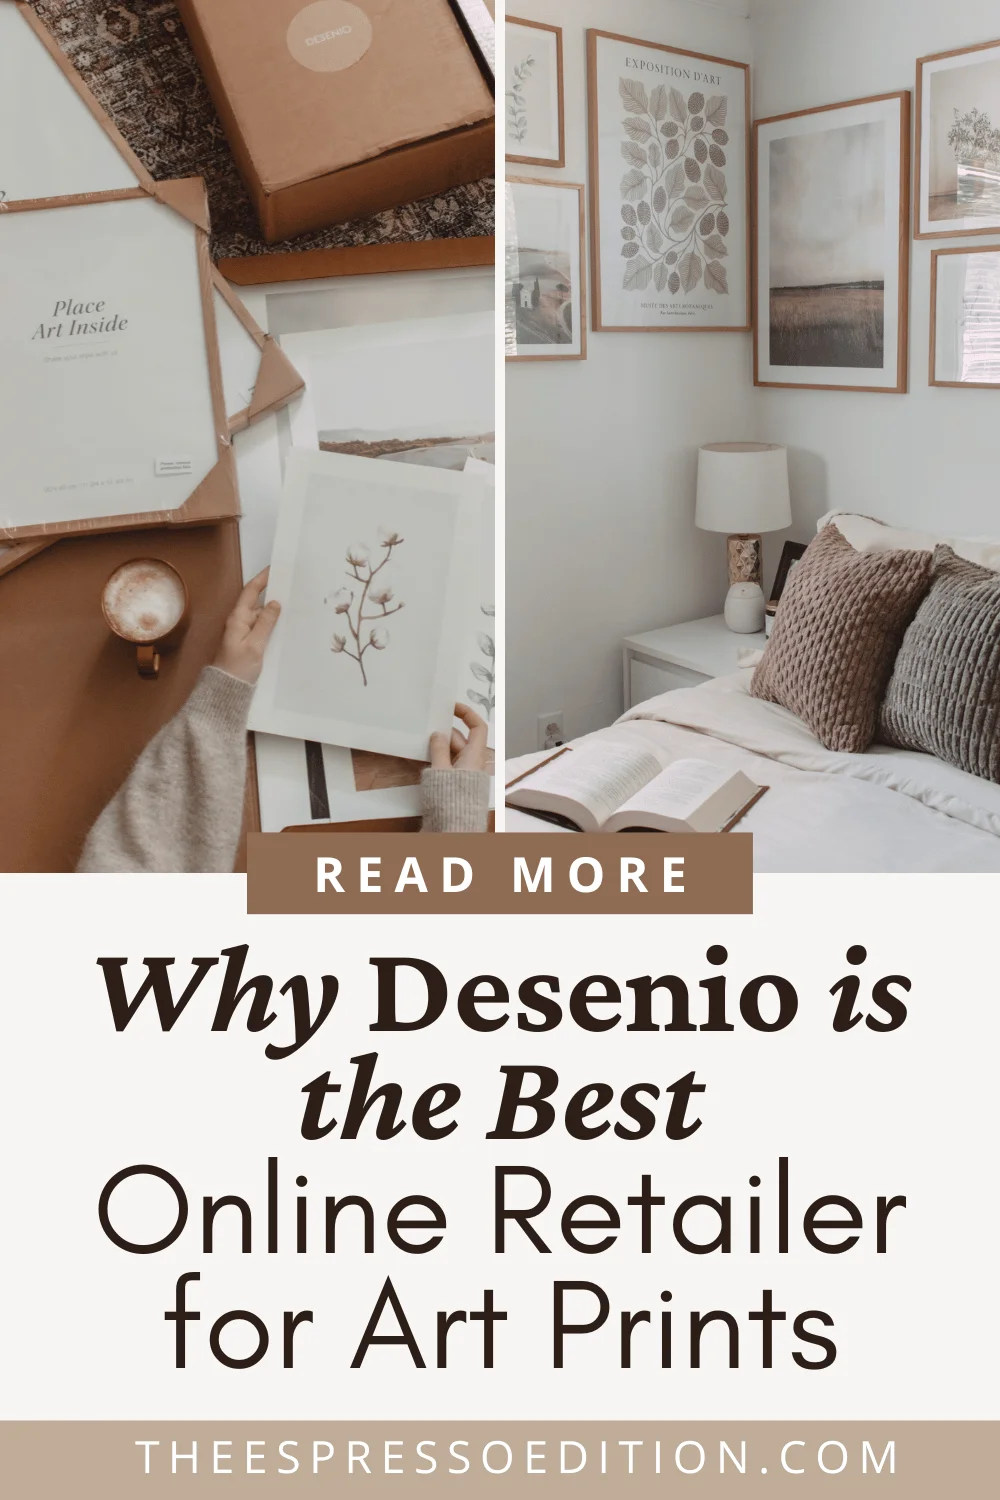 Why Desenio is the Best Online Retailer for Art Prints by The Espresso Edition cozy book and lifestyle blog